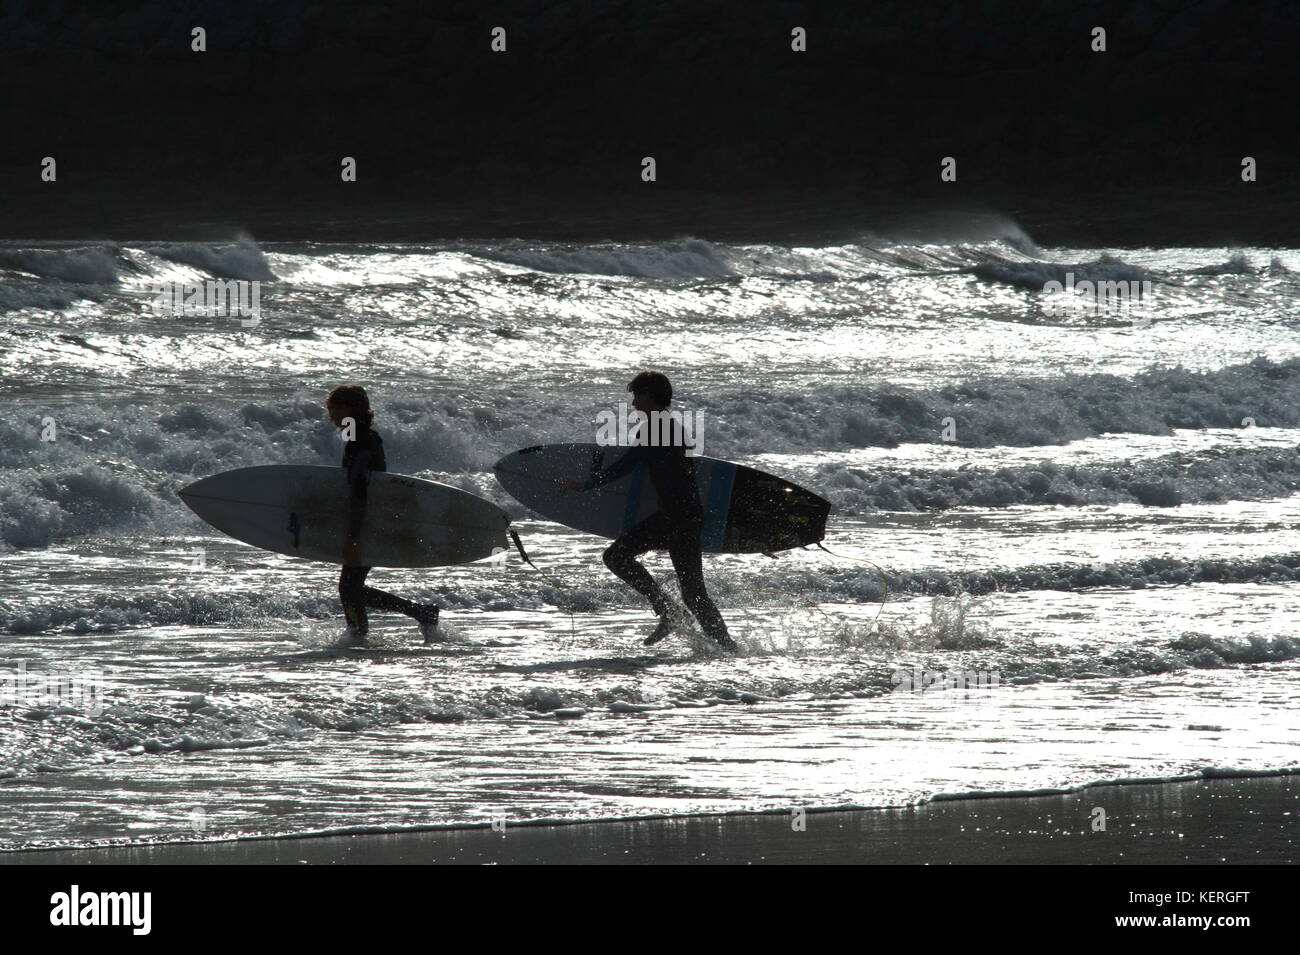 Silhouetted against the sparkling waves two young surfers enter the water together Stock Photo